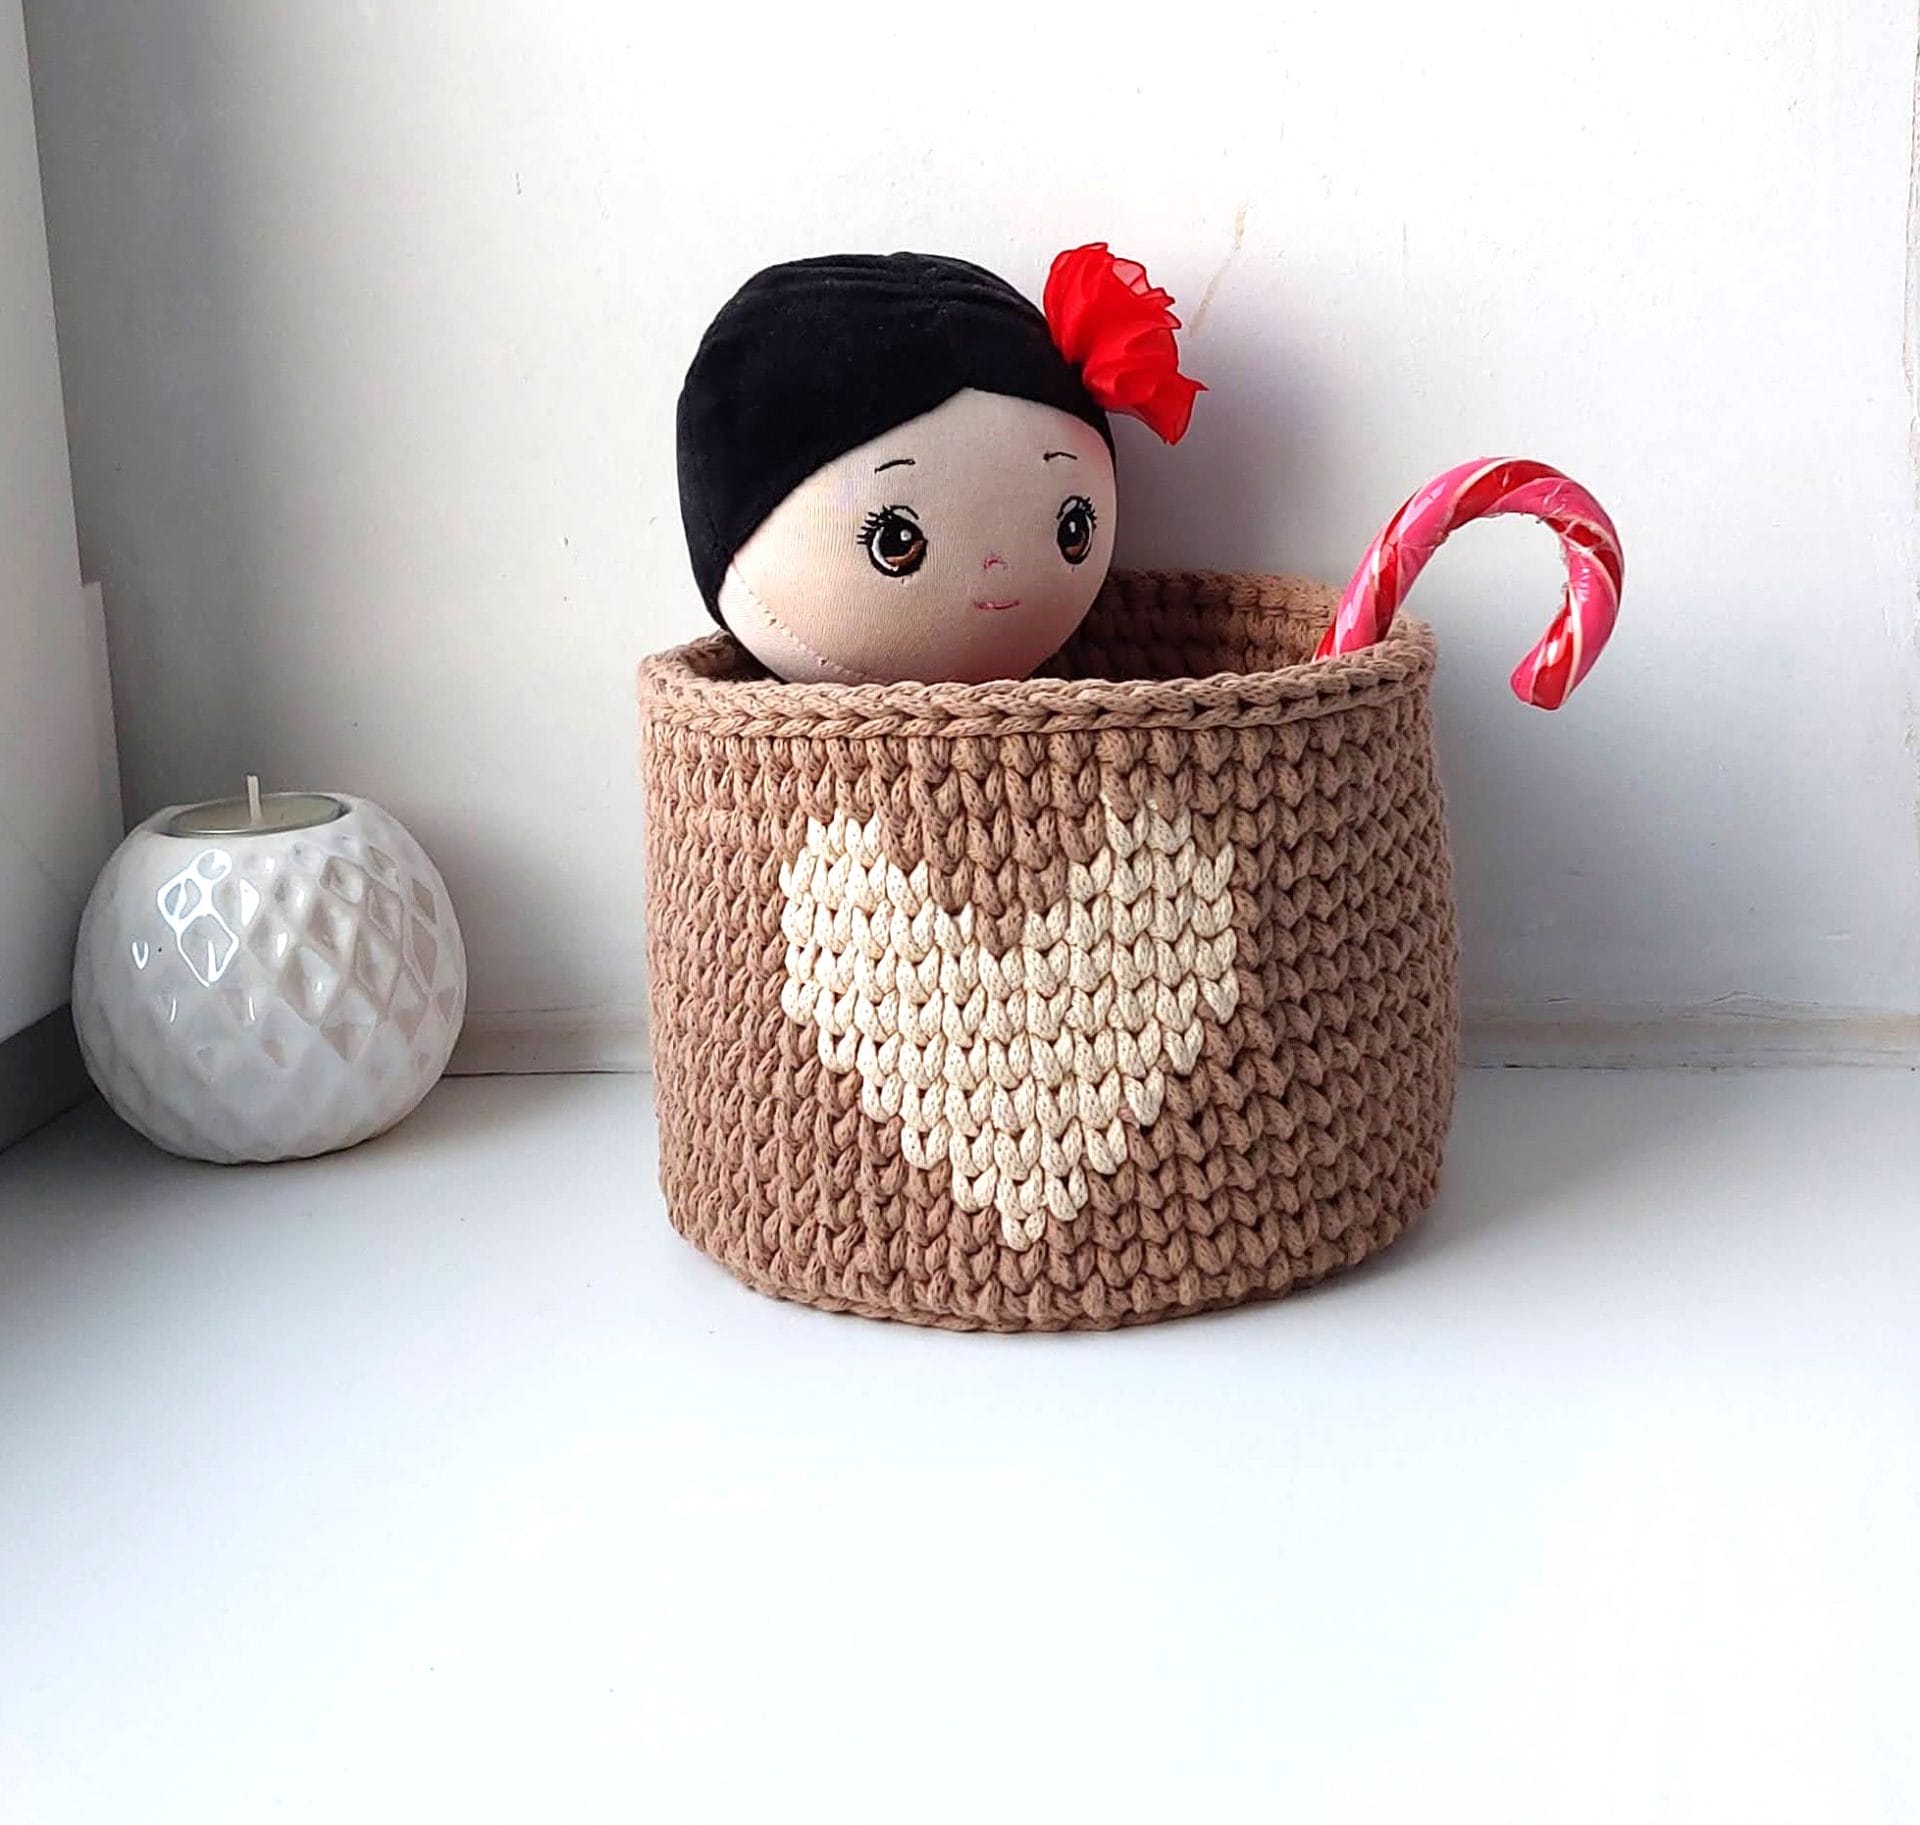 DIY tutorial crochet baskets with hearts S L M sizes